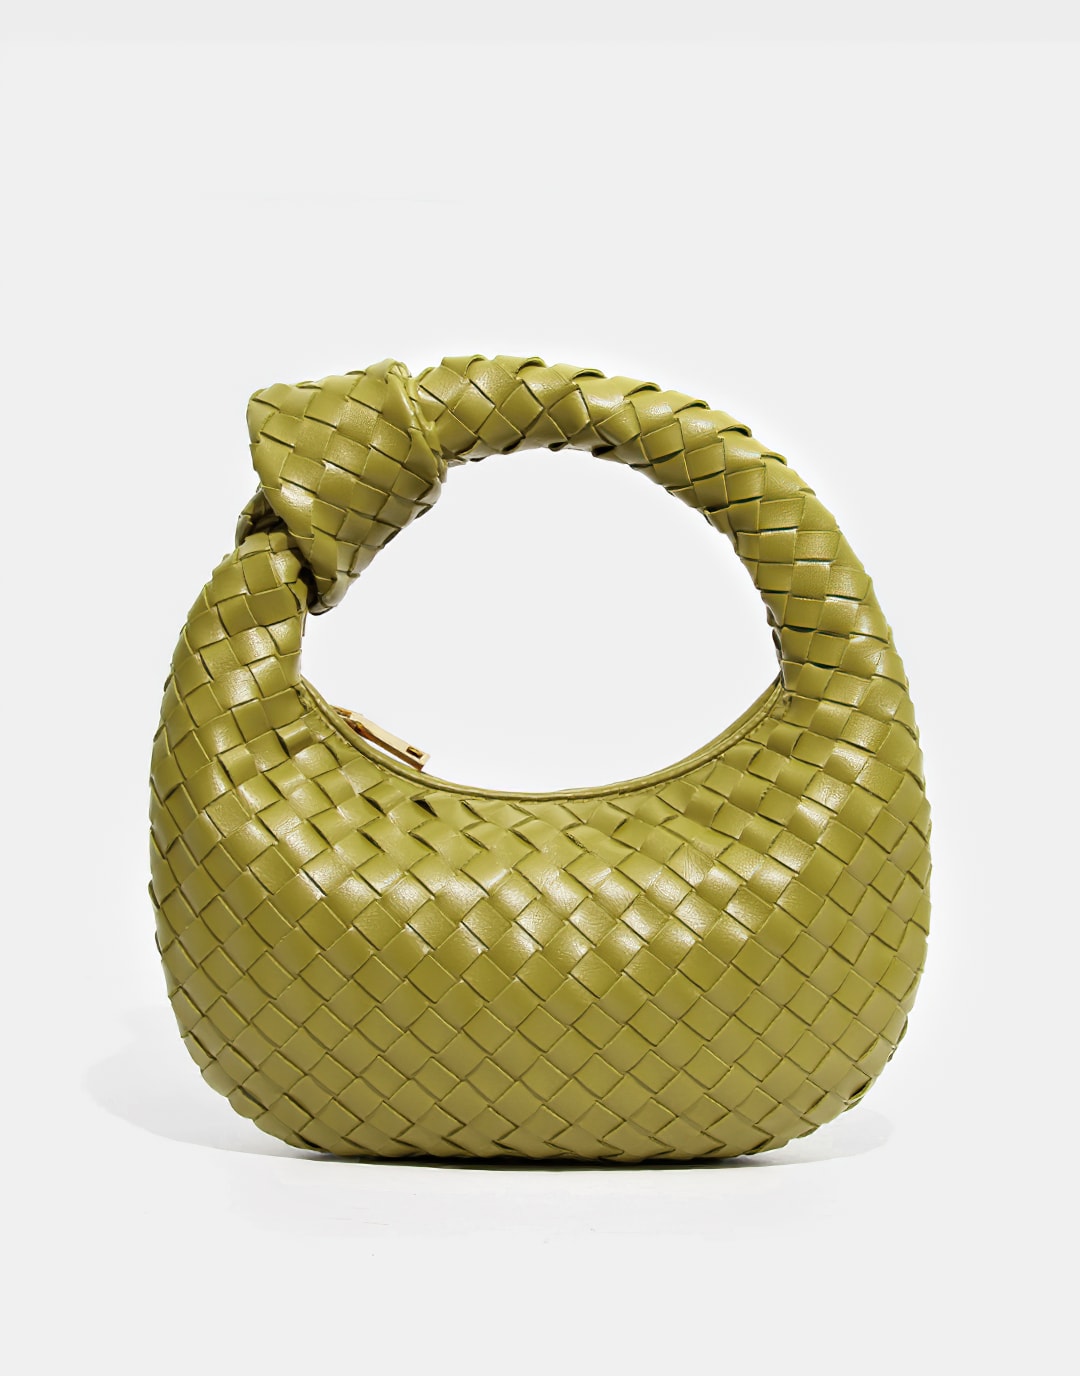 Handmade Women's Leather Woven Pattern Daily Bag